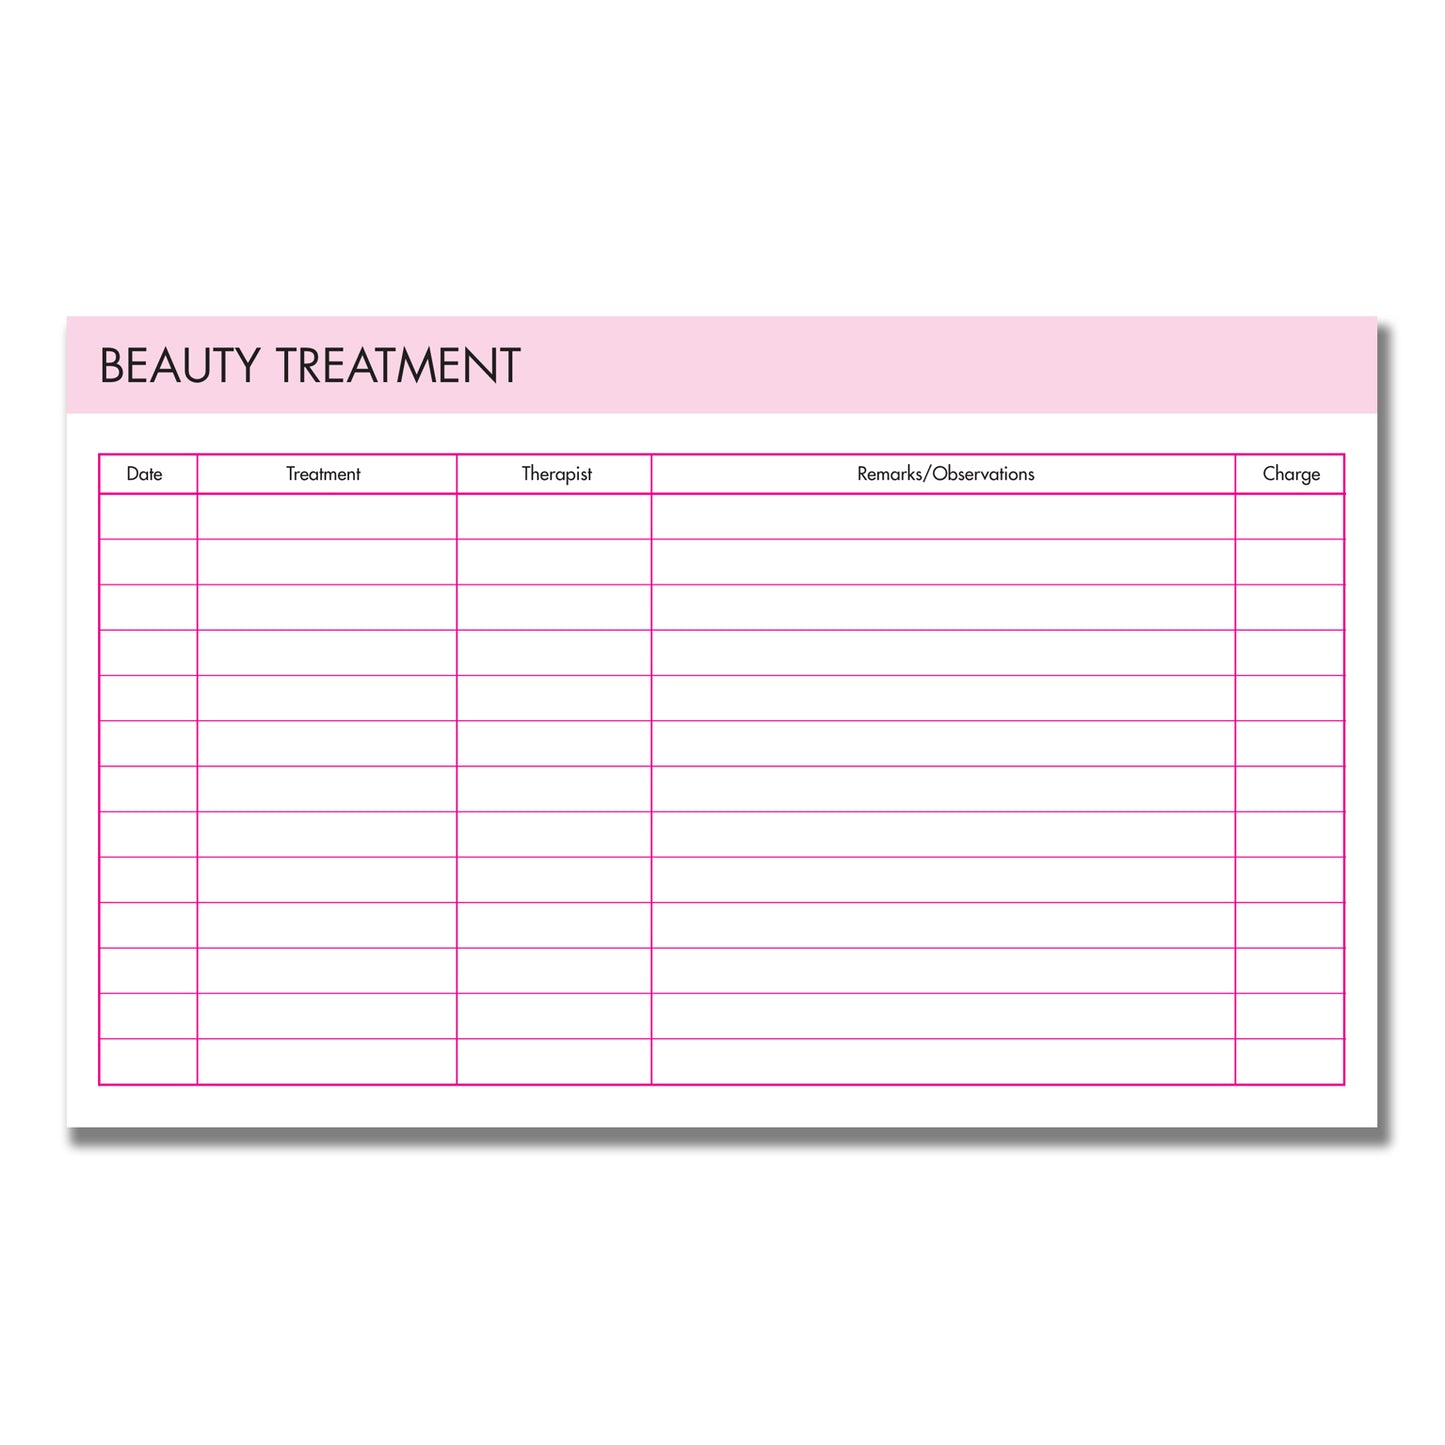 Beauty Treatment Record / Medical Card Pad 202mm x 125mm 50pages 350gsm